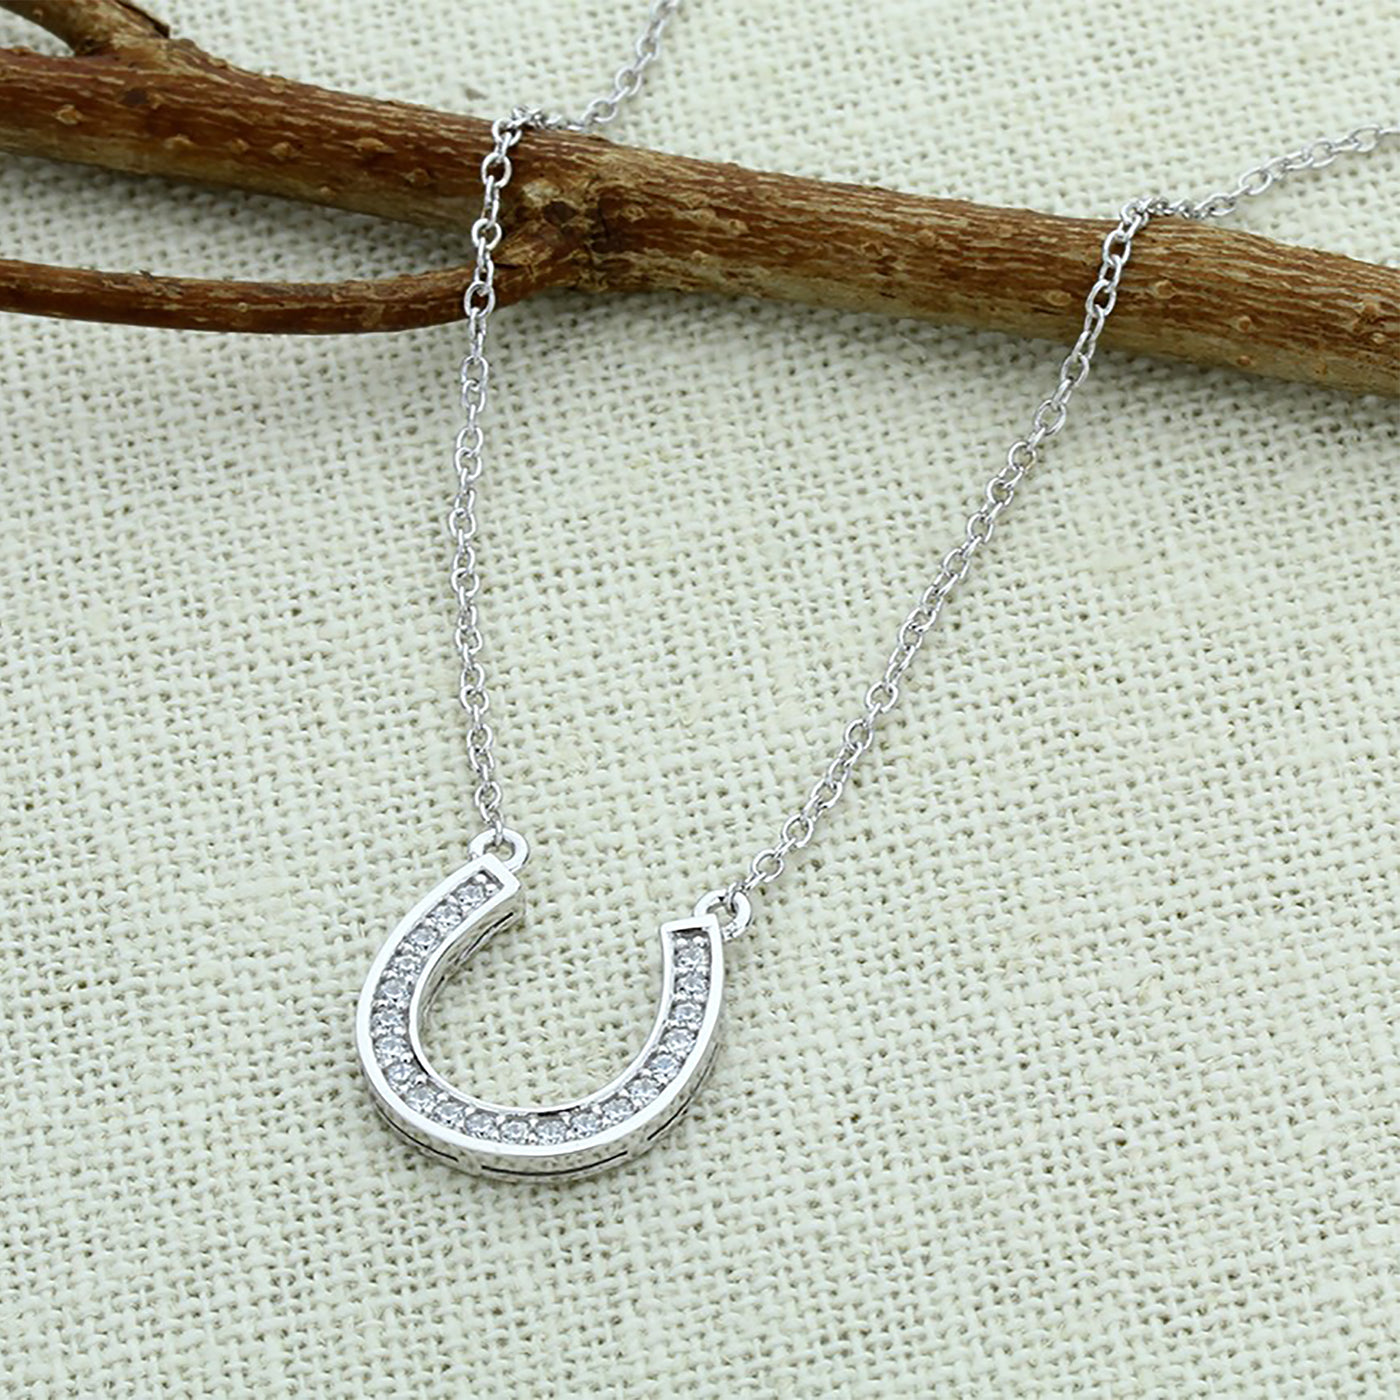 Horseshoe Necklace, 14K Gold Plated Sterling Silver Horse Shoe Pendant Chain Necklace